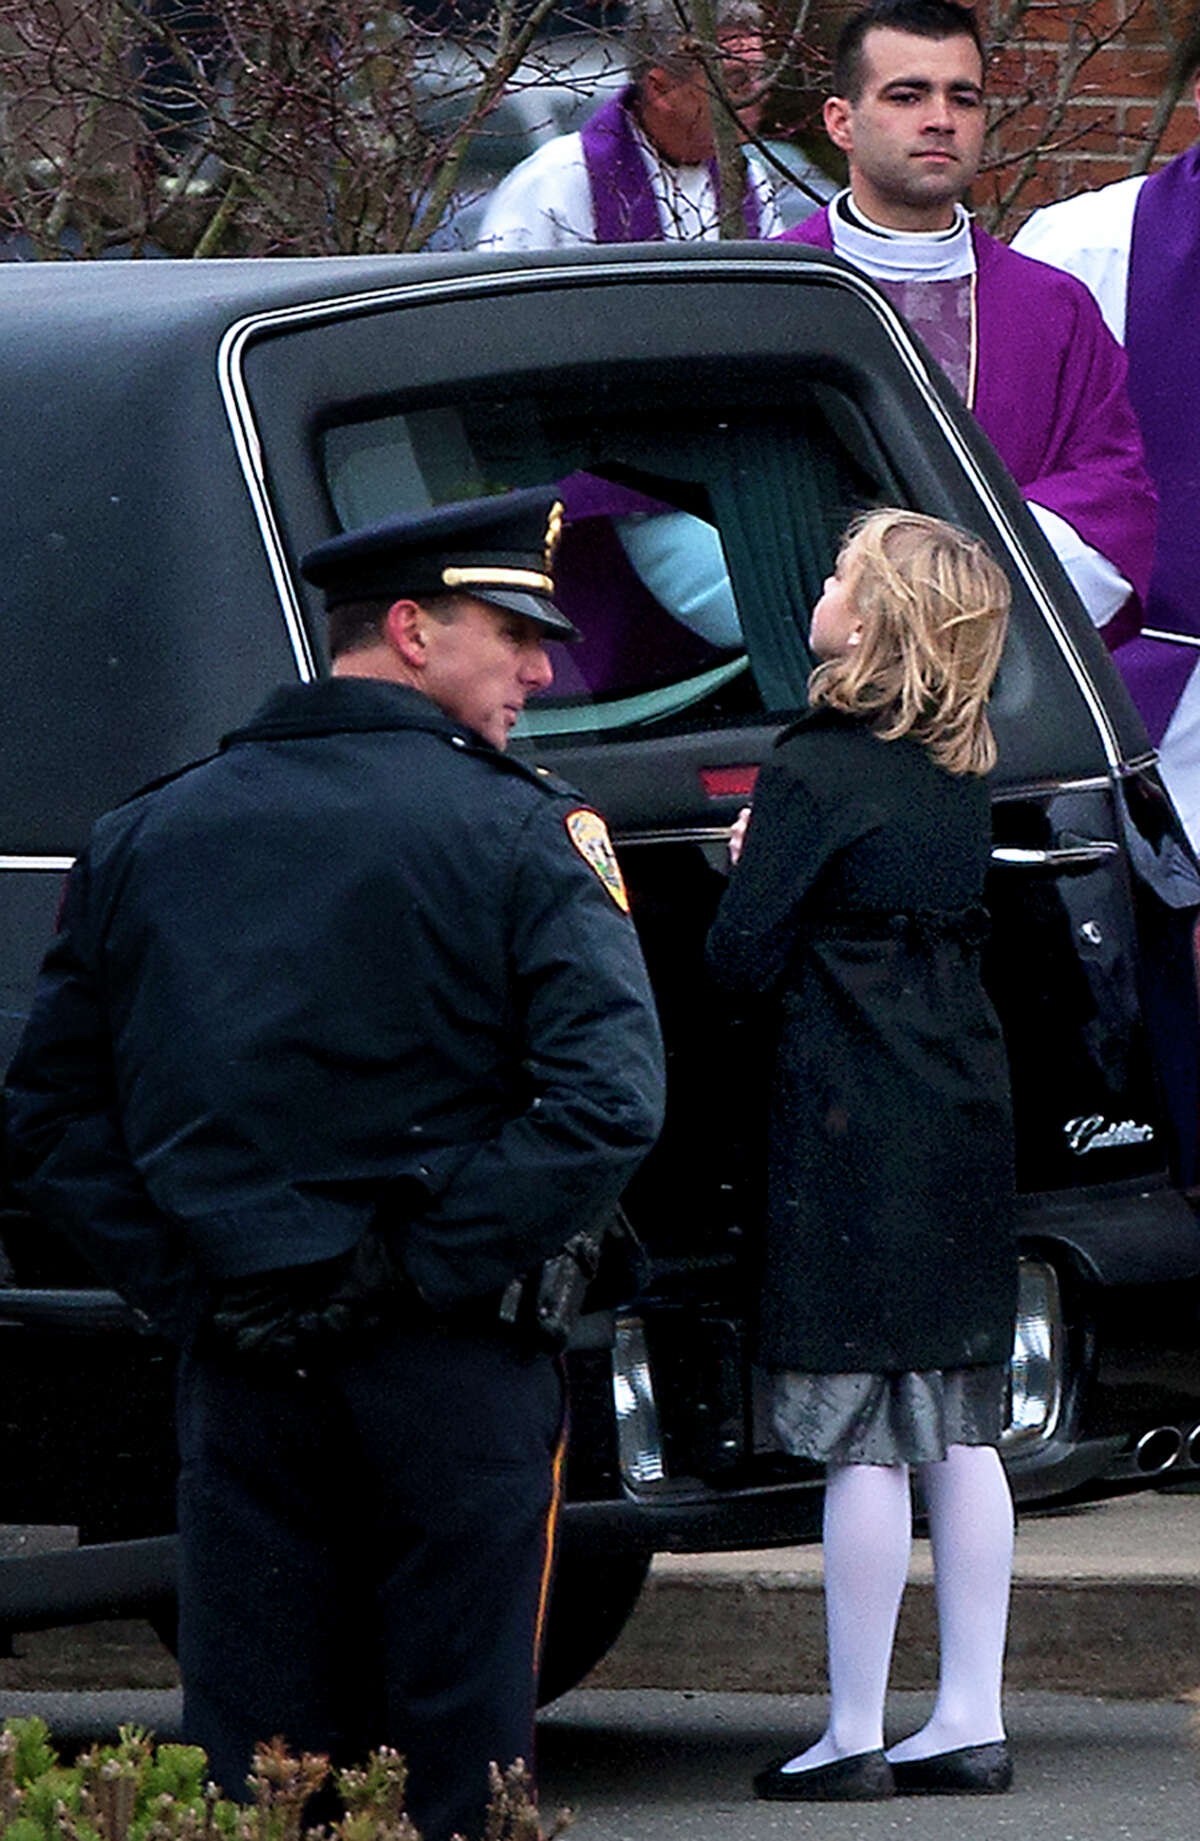 A little girl looks into the hearse carrying the casket of Josephine Gay after her funeral at St. Rose of Lima Roman Catholic Church, Saturday, Dec. 22, 2012, in Newtown. Gay was one of 26 killed after gunman Adam Lanza opened fire killing 26 individuals, 20 whom were children, at Sandy Hook Elementary School last Friday.